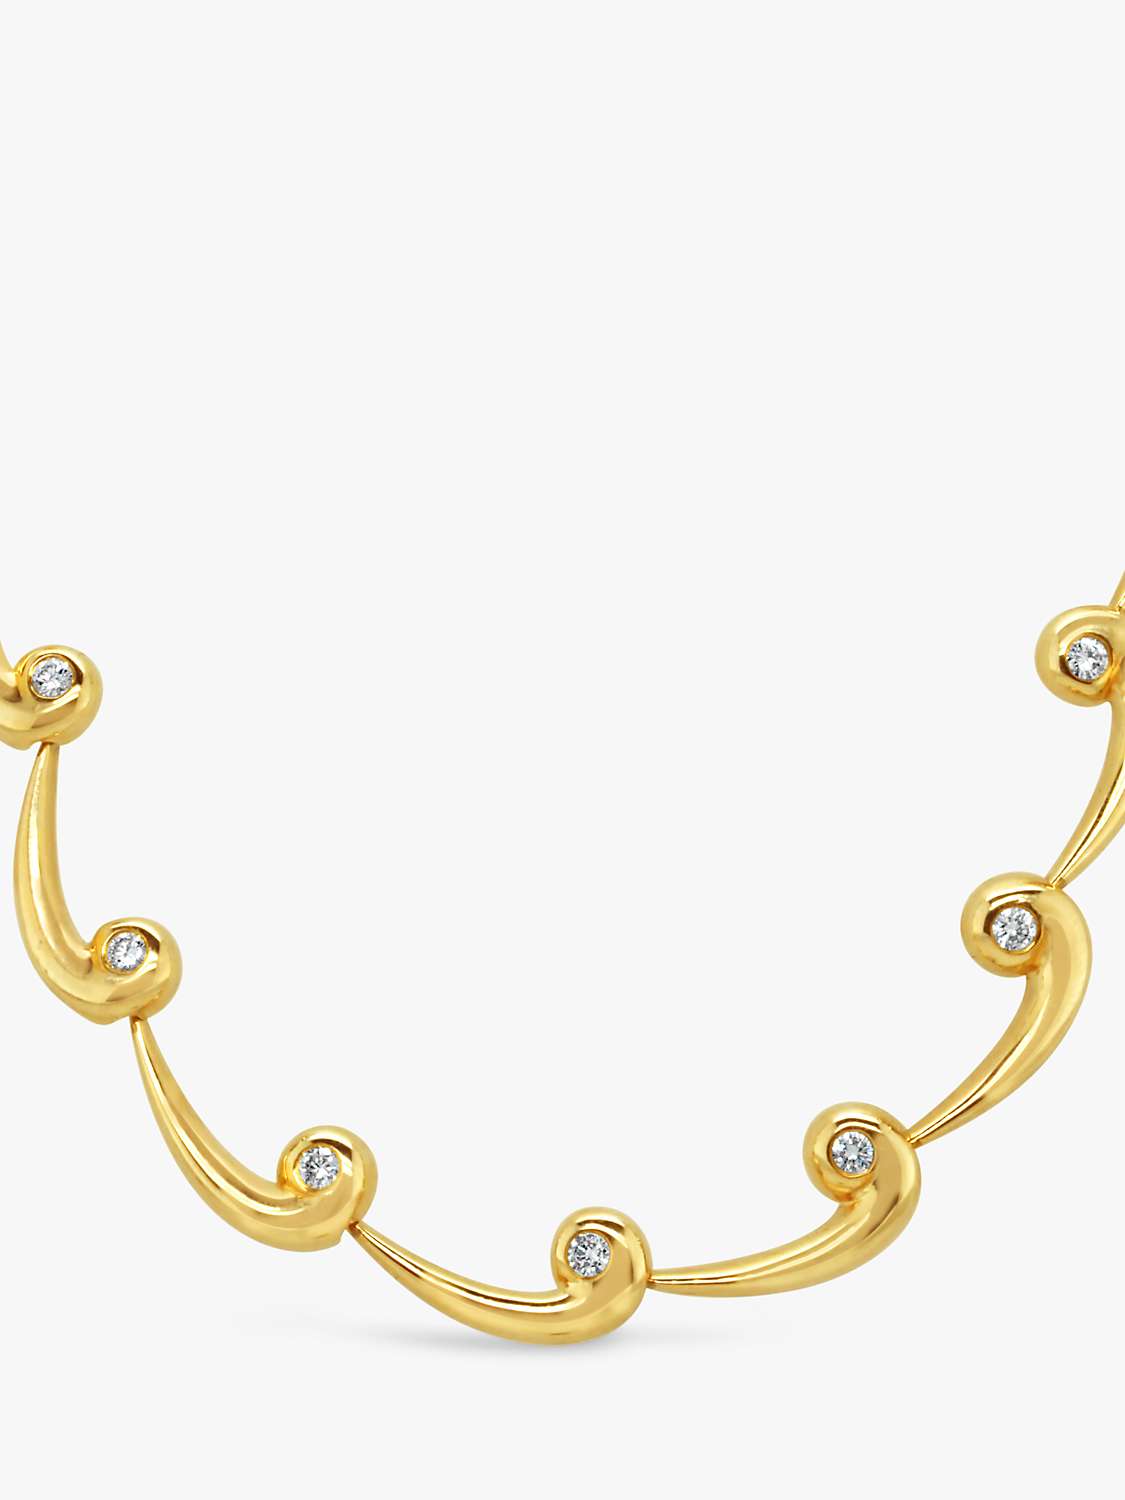 Buy Milton & Humble Jewellery Second Hand 9ct Yellow Gold Diamond Link Necklace, Dated 1998 Online at johnlewis.com